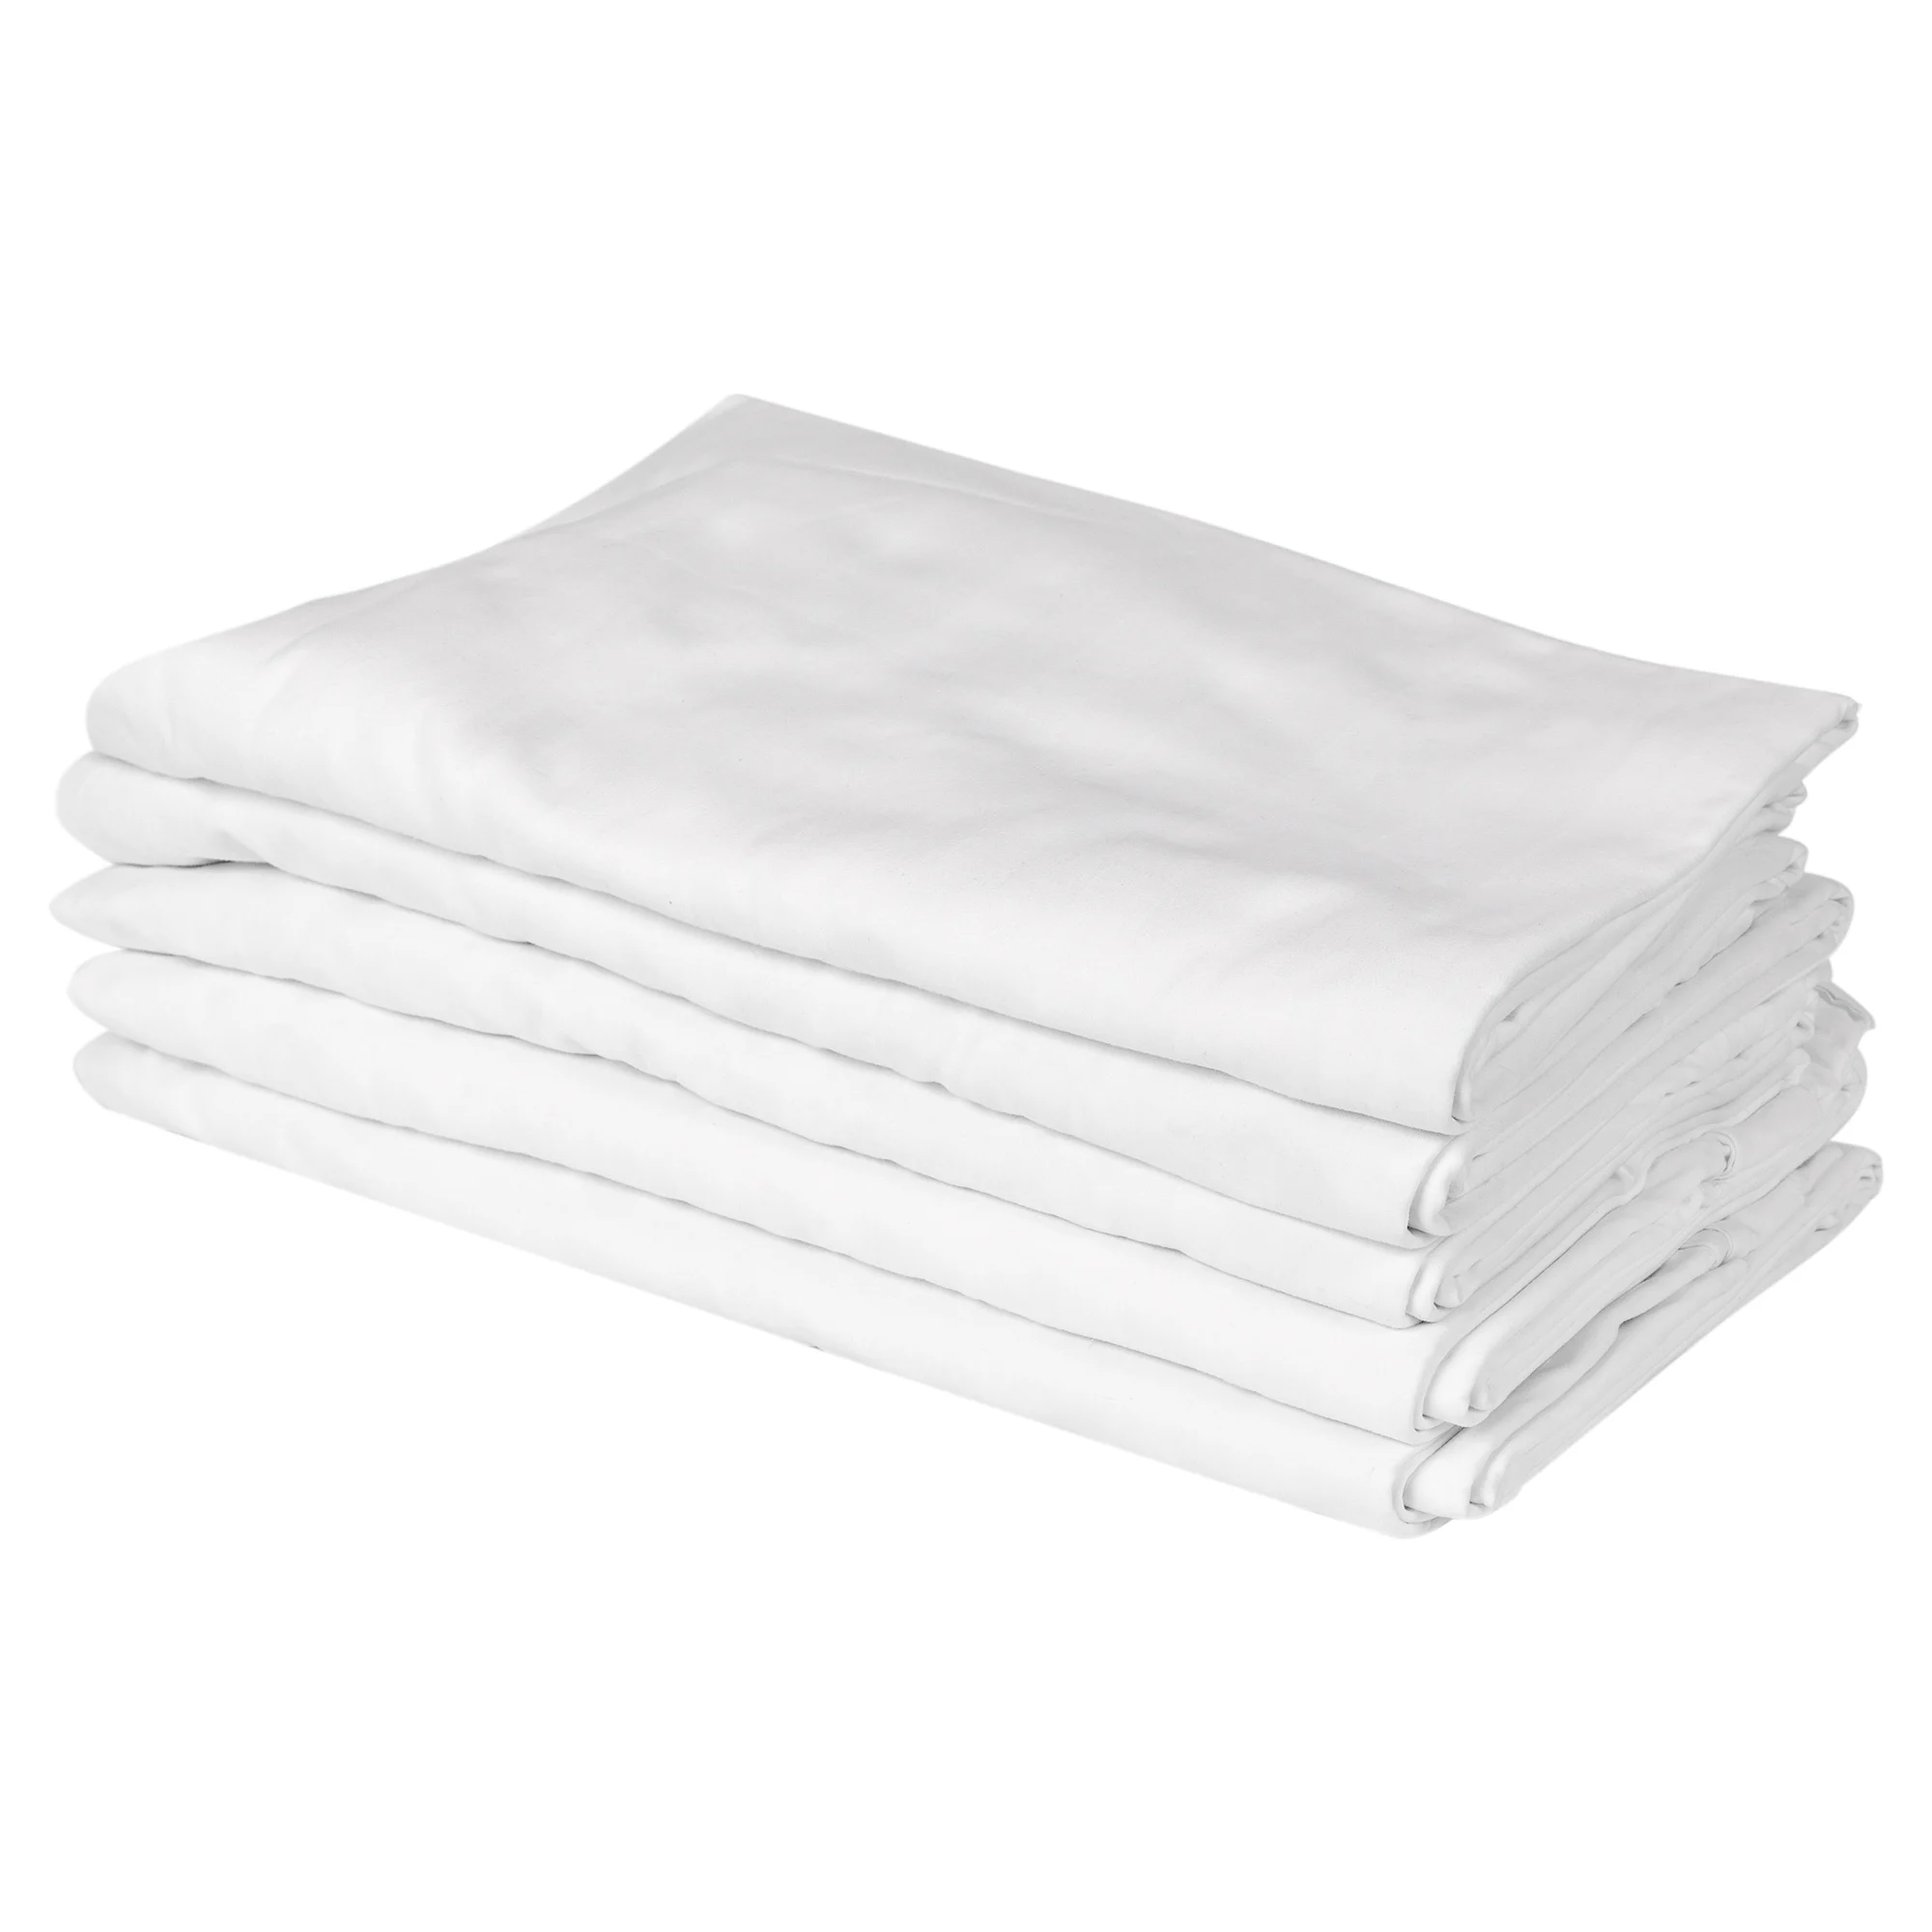 Hotel Used Bed Sheet Rags Cotton Sheeting Rags Fabric Cutting Pieces Customized Logo Wiping Rags